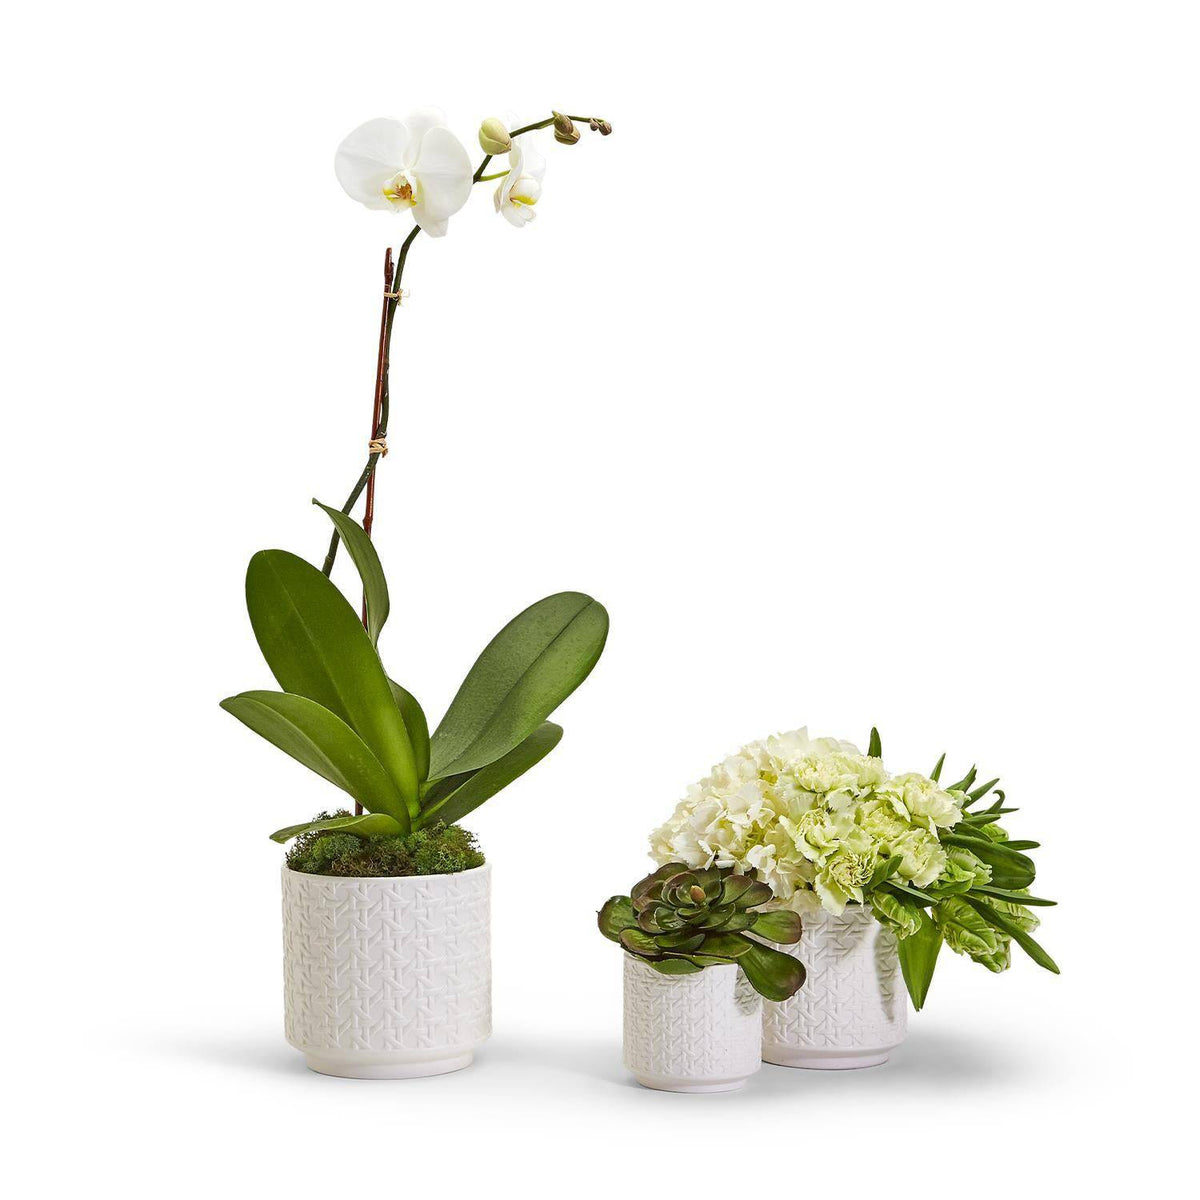 Cane Webbing Planter - 3 Sizes Available - The Preppy Bunny